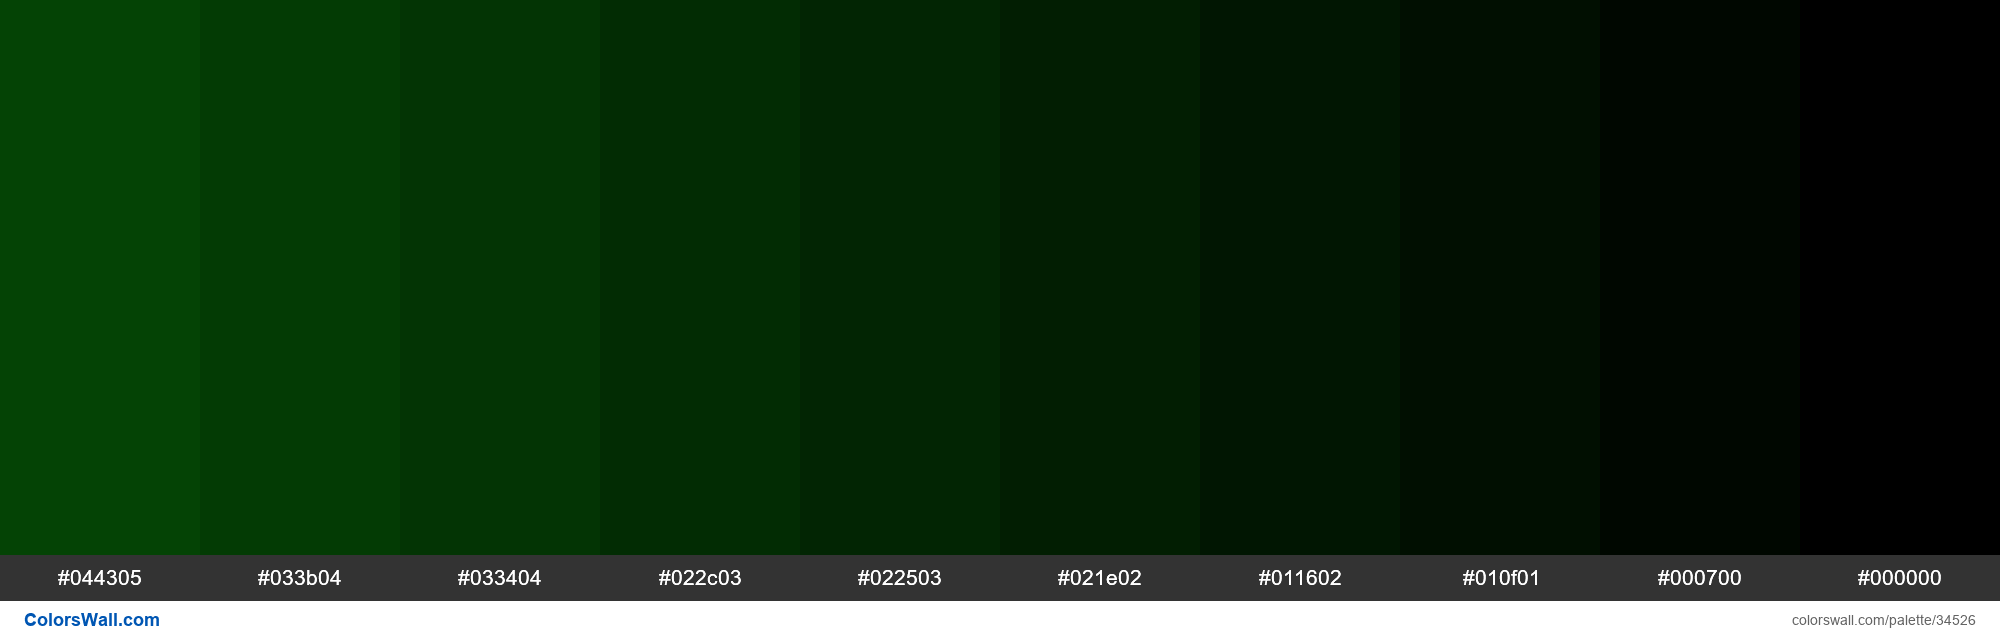 colorswall on X: Shades XKCD Color bottle green #044a05 hex #044305,  #033b04, #033404, #022c03, #022503, #021e02, #011602, #010f01, #000700,  #000000 #colors #palette   /  X